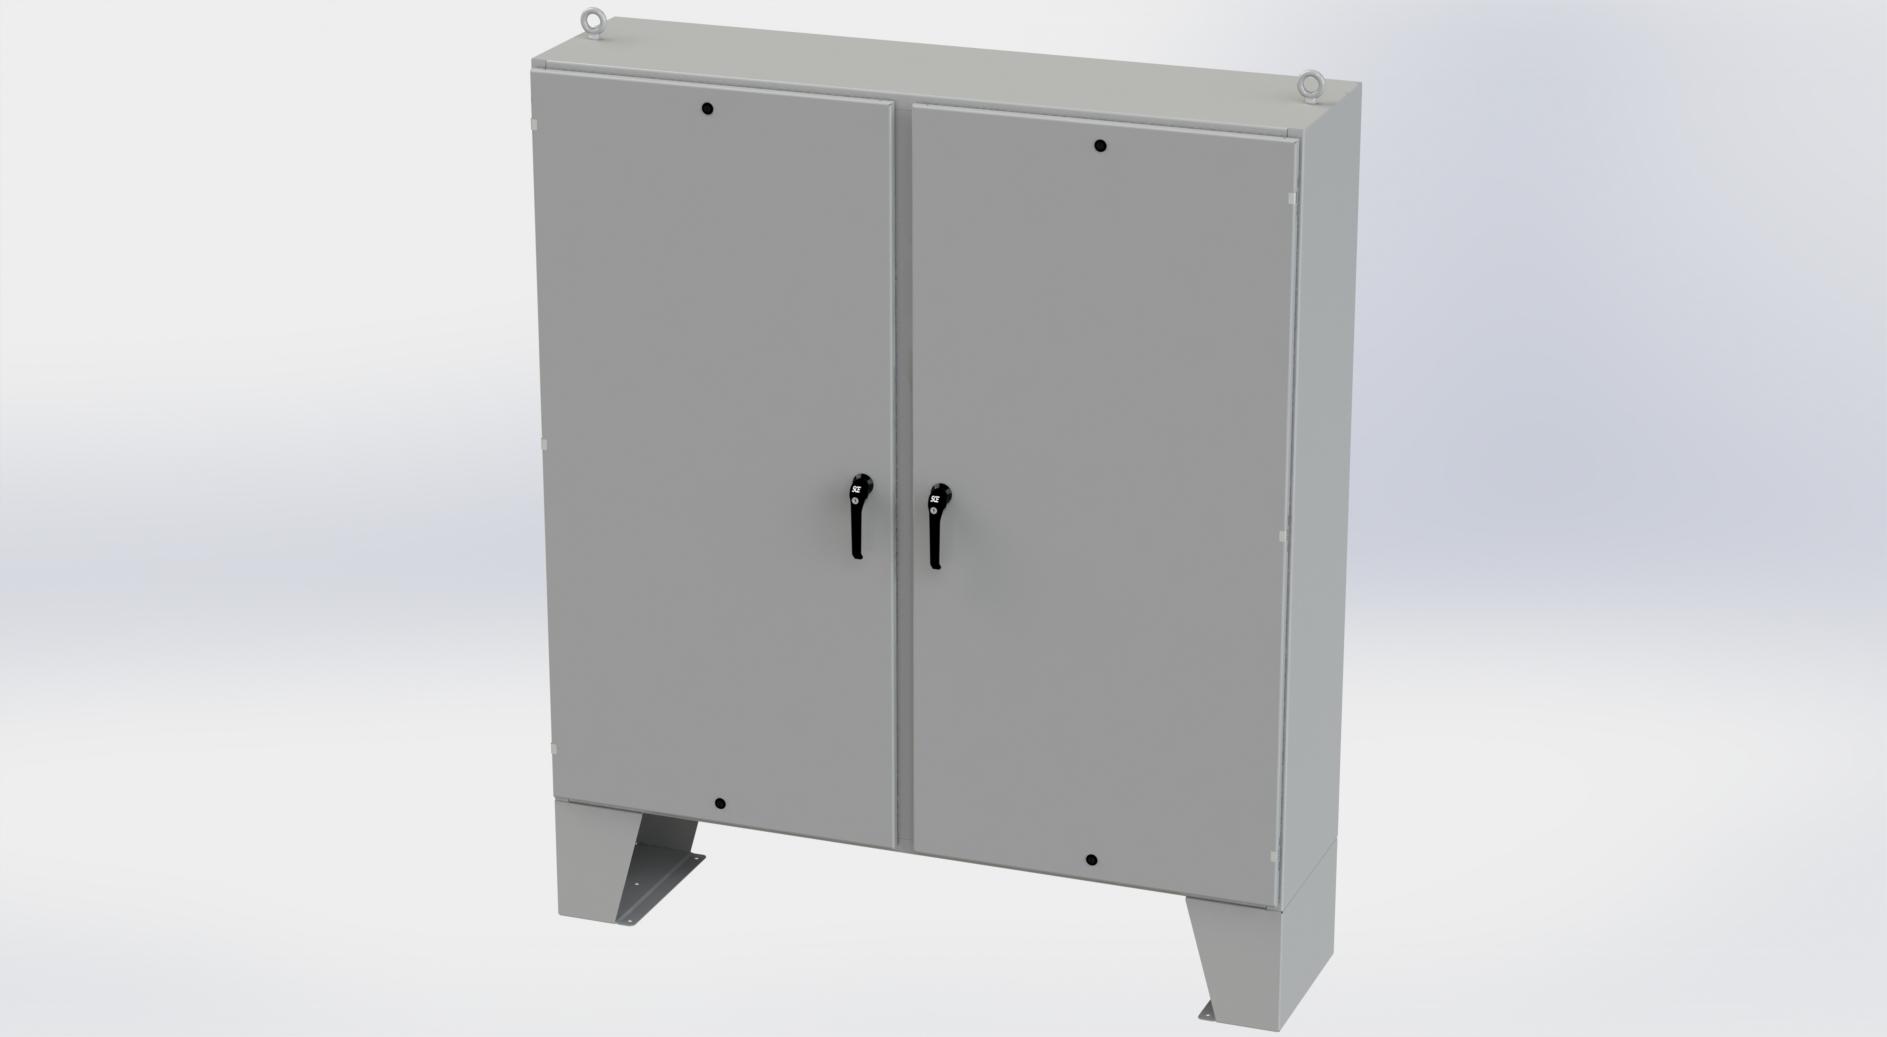 Saginaw Control SCE-72EL7218LPPL 2DR EL LPPL Enclosure, Height:72.00", Width:72.00", Depth:18.00", ANSI-61 gray powder coating inside and out. Optional sub-panels are powder coated white.